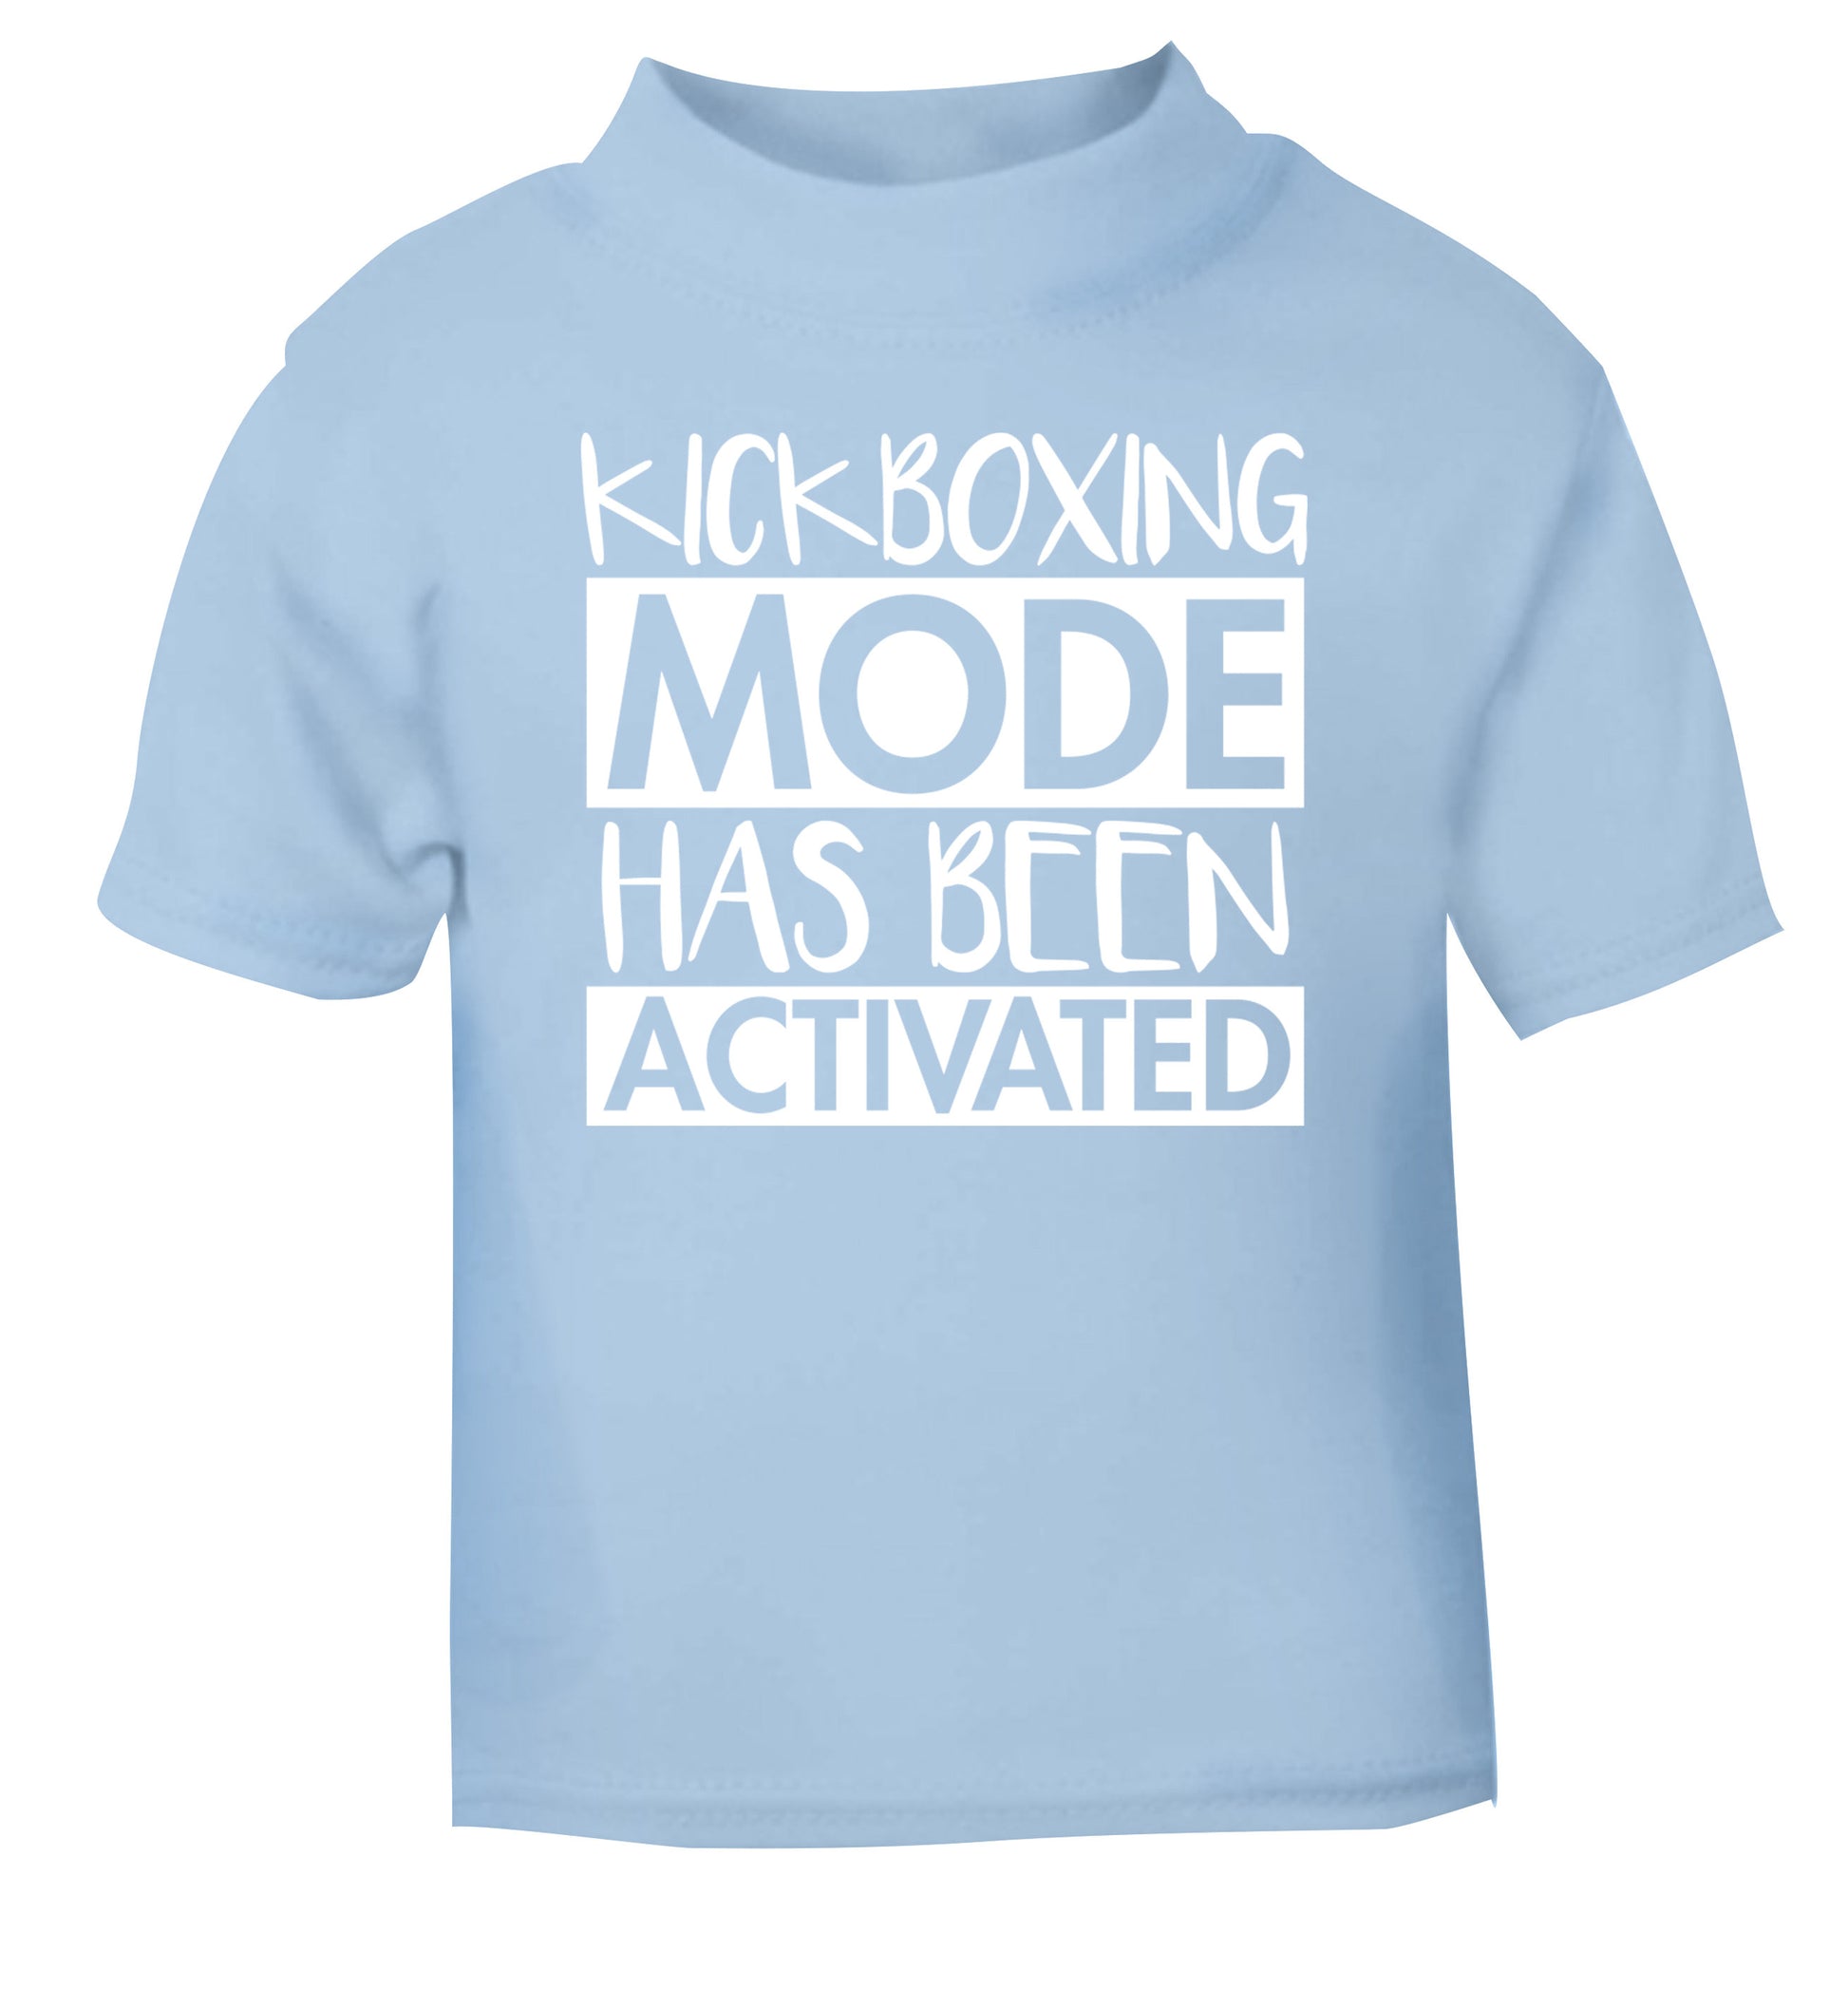 Kickboxing mode activated light blue Baby Toddler Tshirt 2 Years